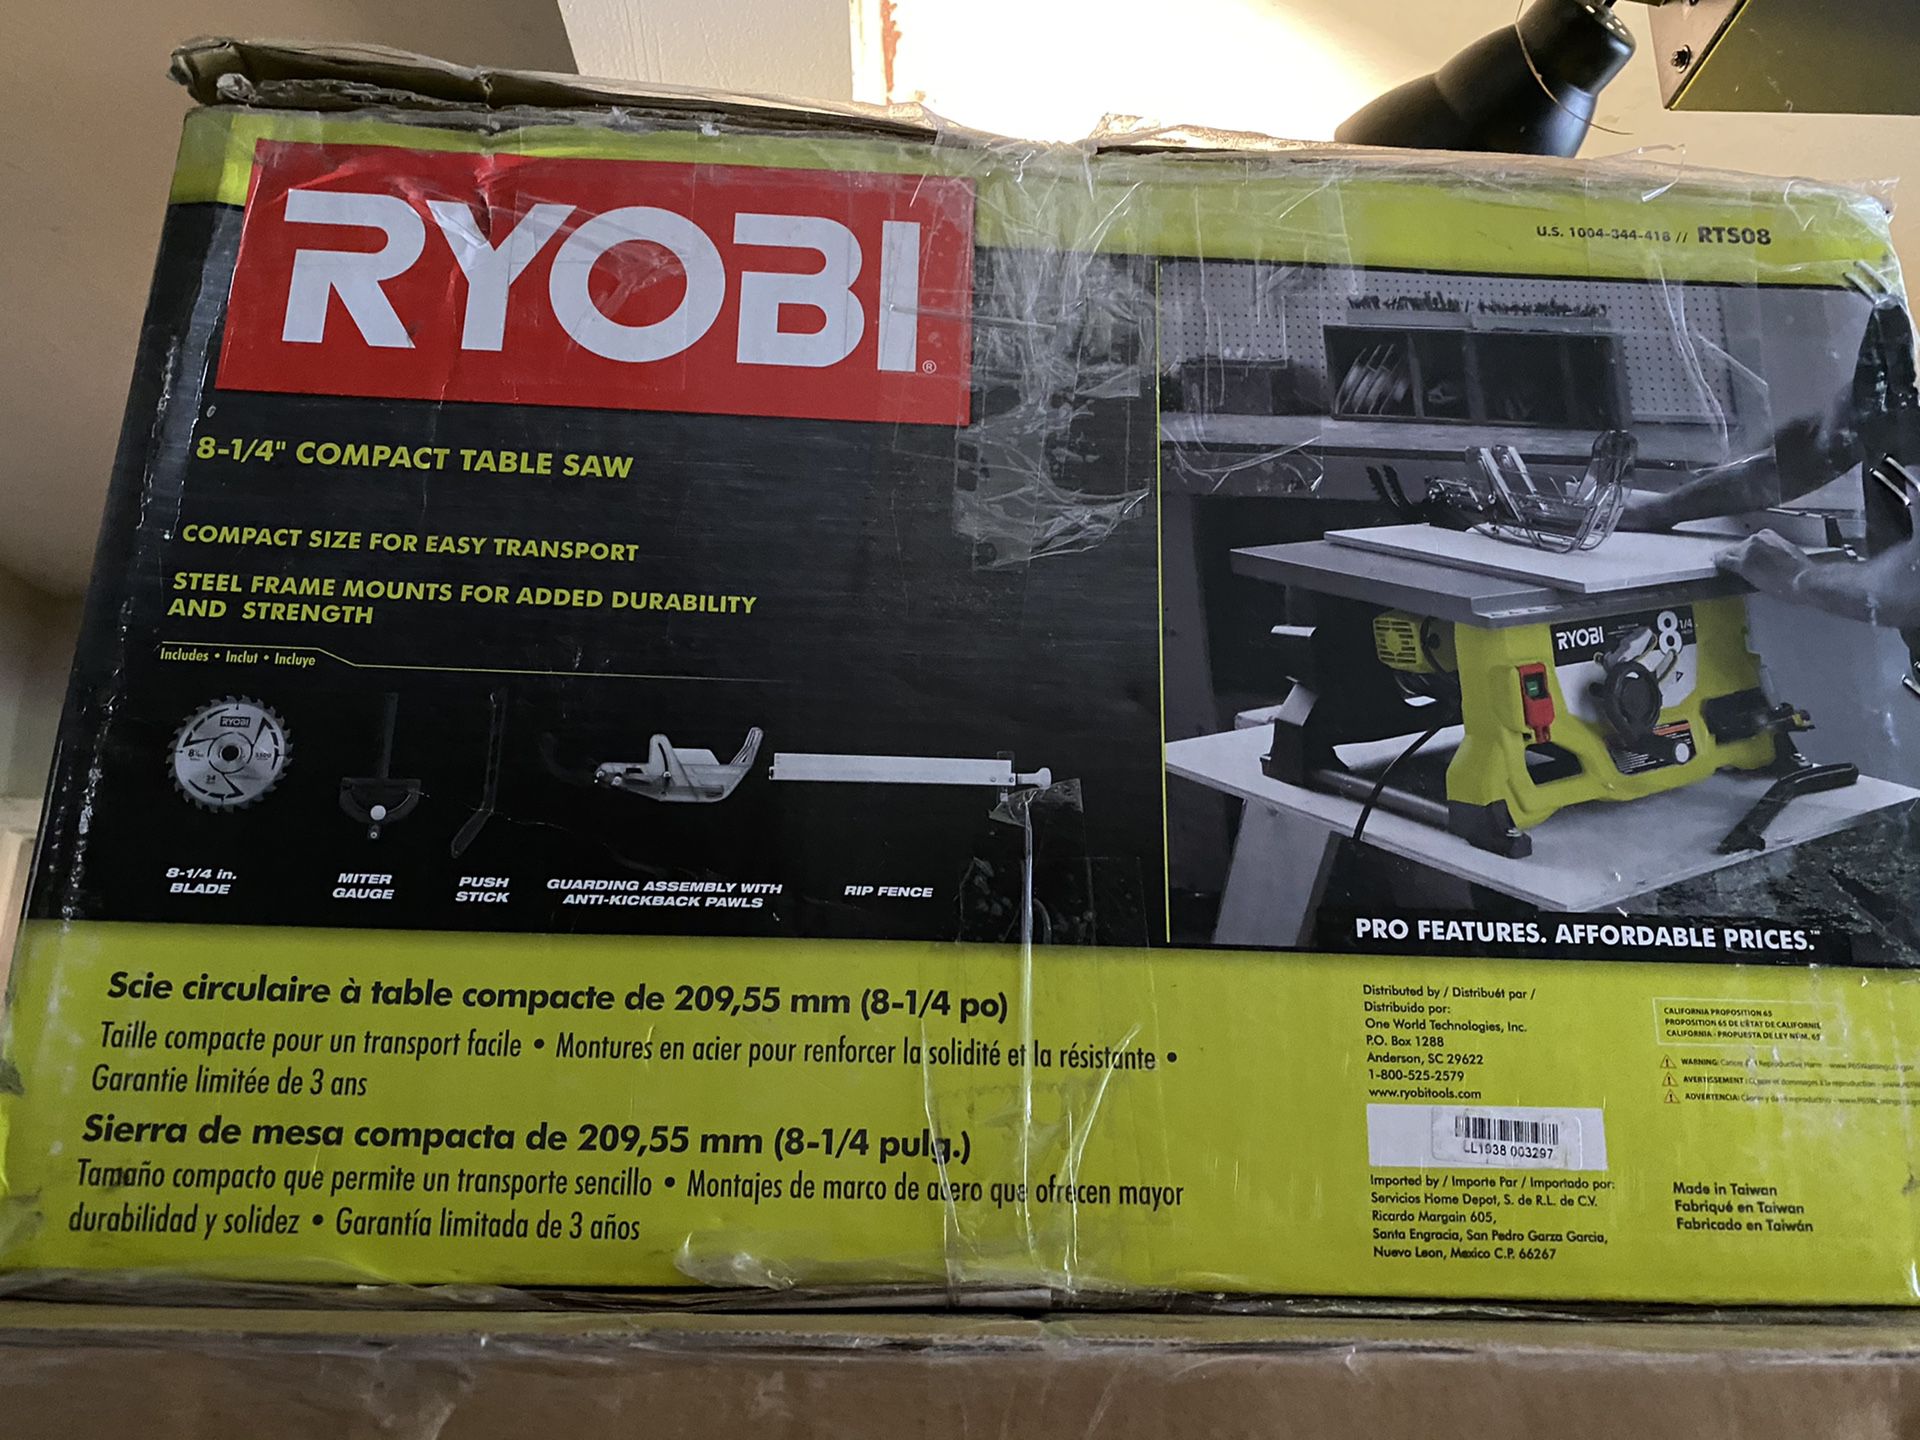 Used Ryobi and Ridgid Table Saws and Air Compressors